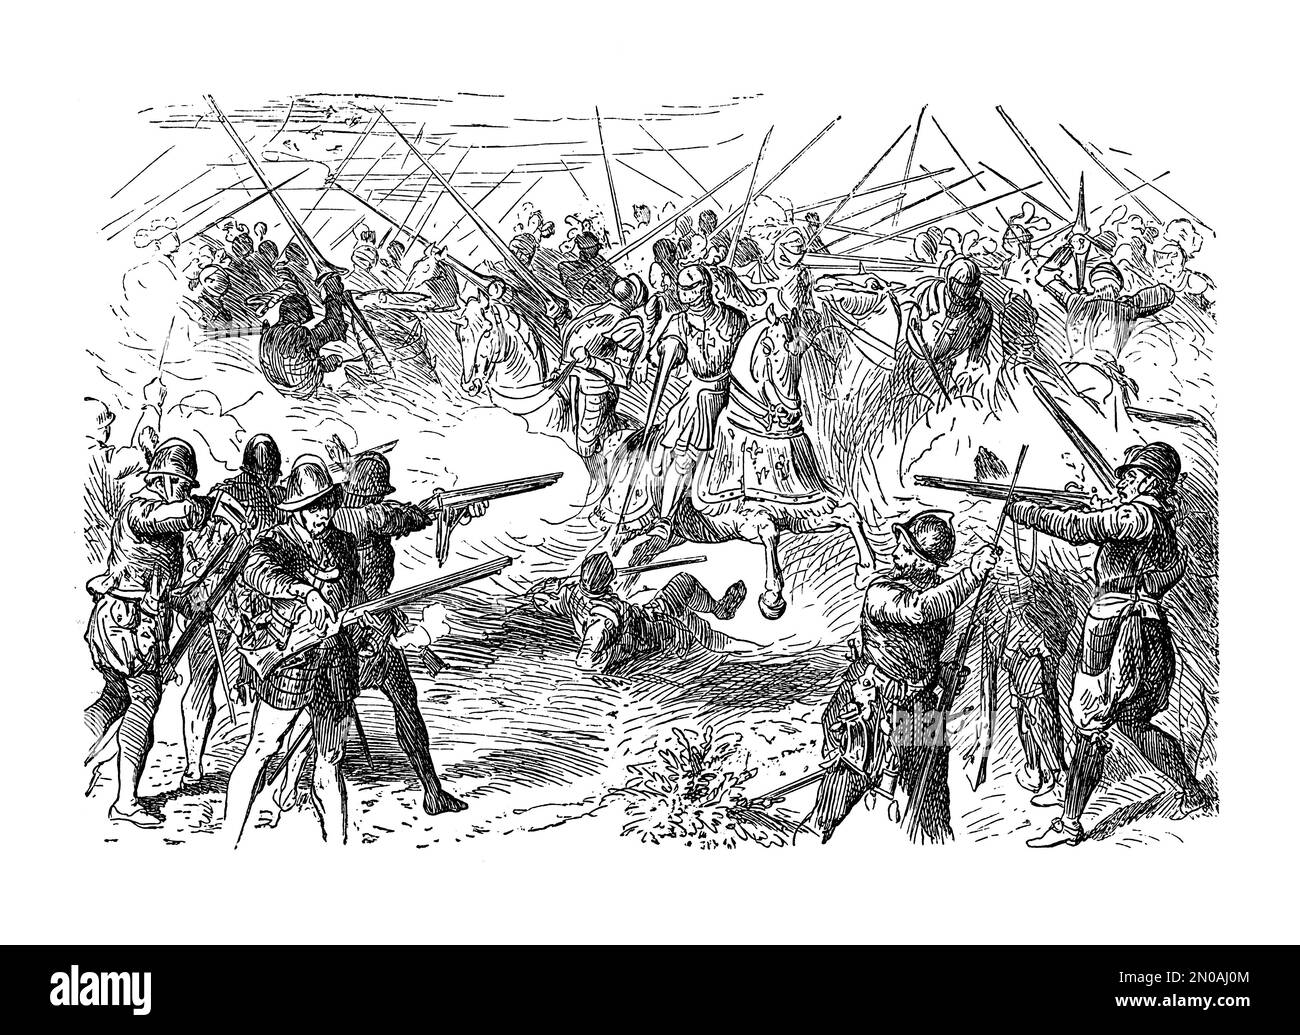 19th-century illustration of the Battle of Pavia, fought on February 24, 1525. The Spanish-Imperial army attacked the French army outside the city wal Stock Photo